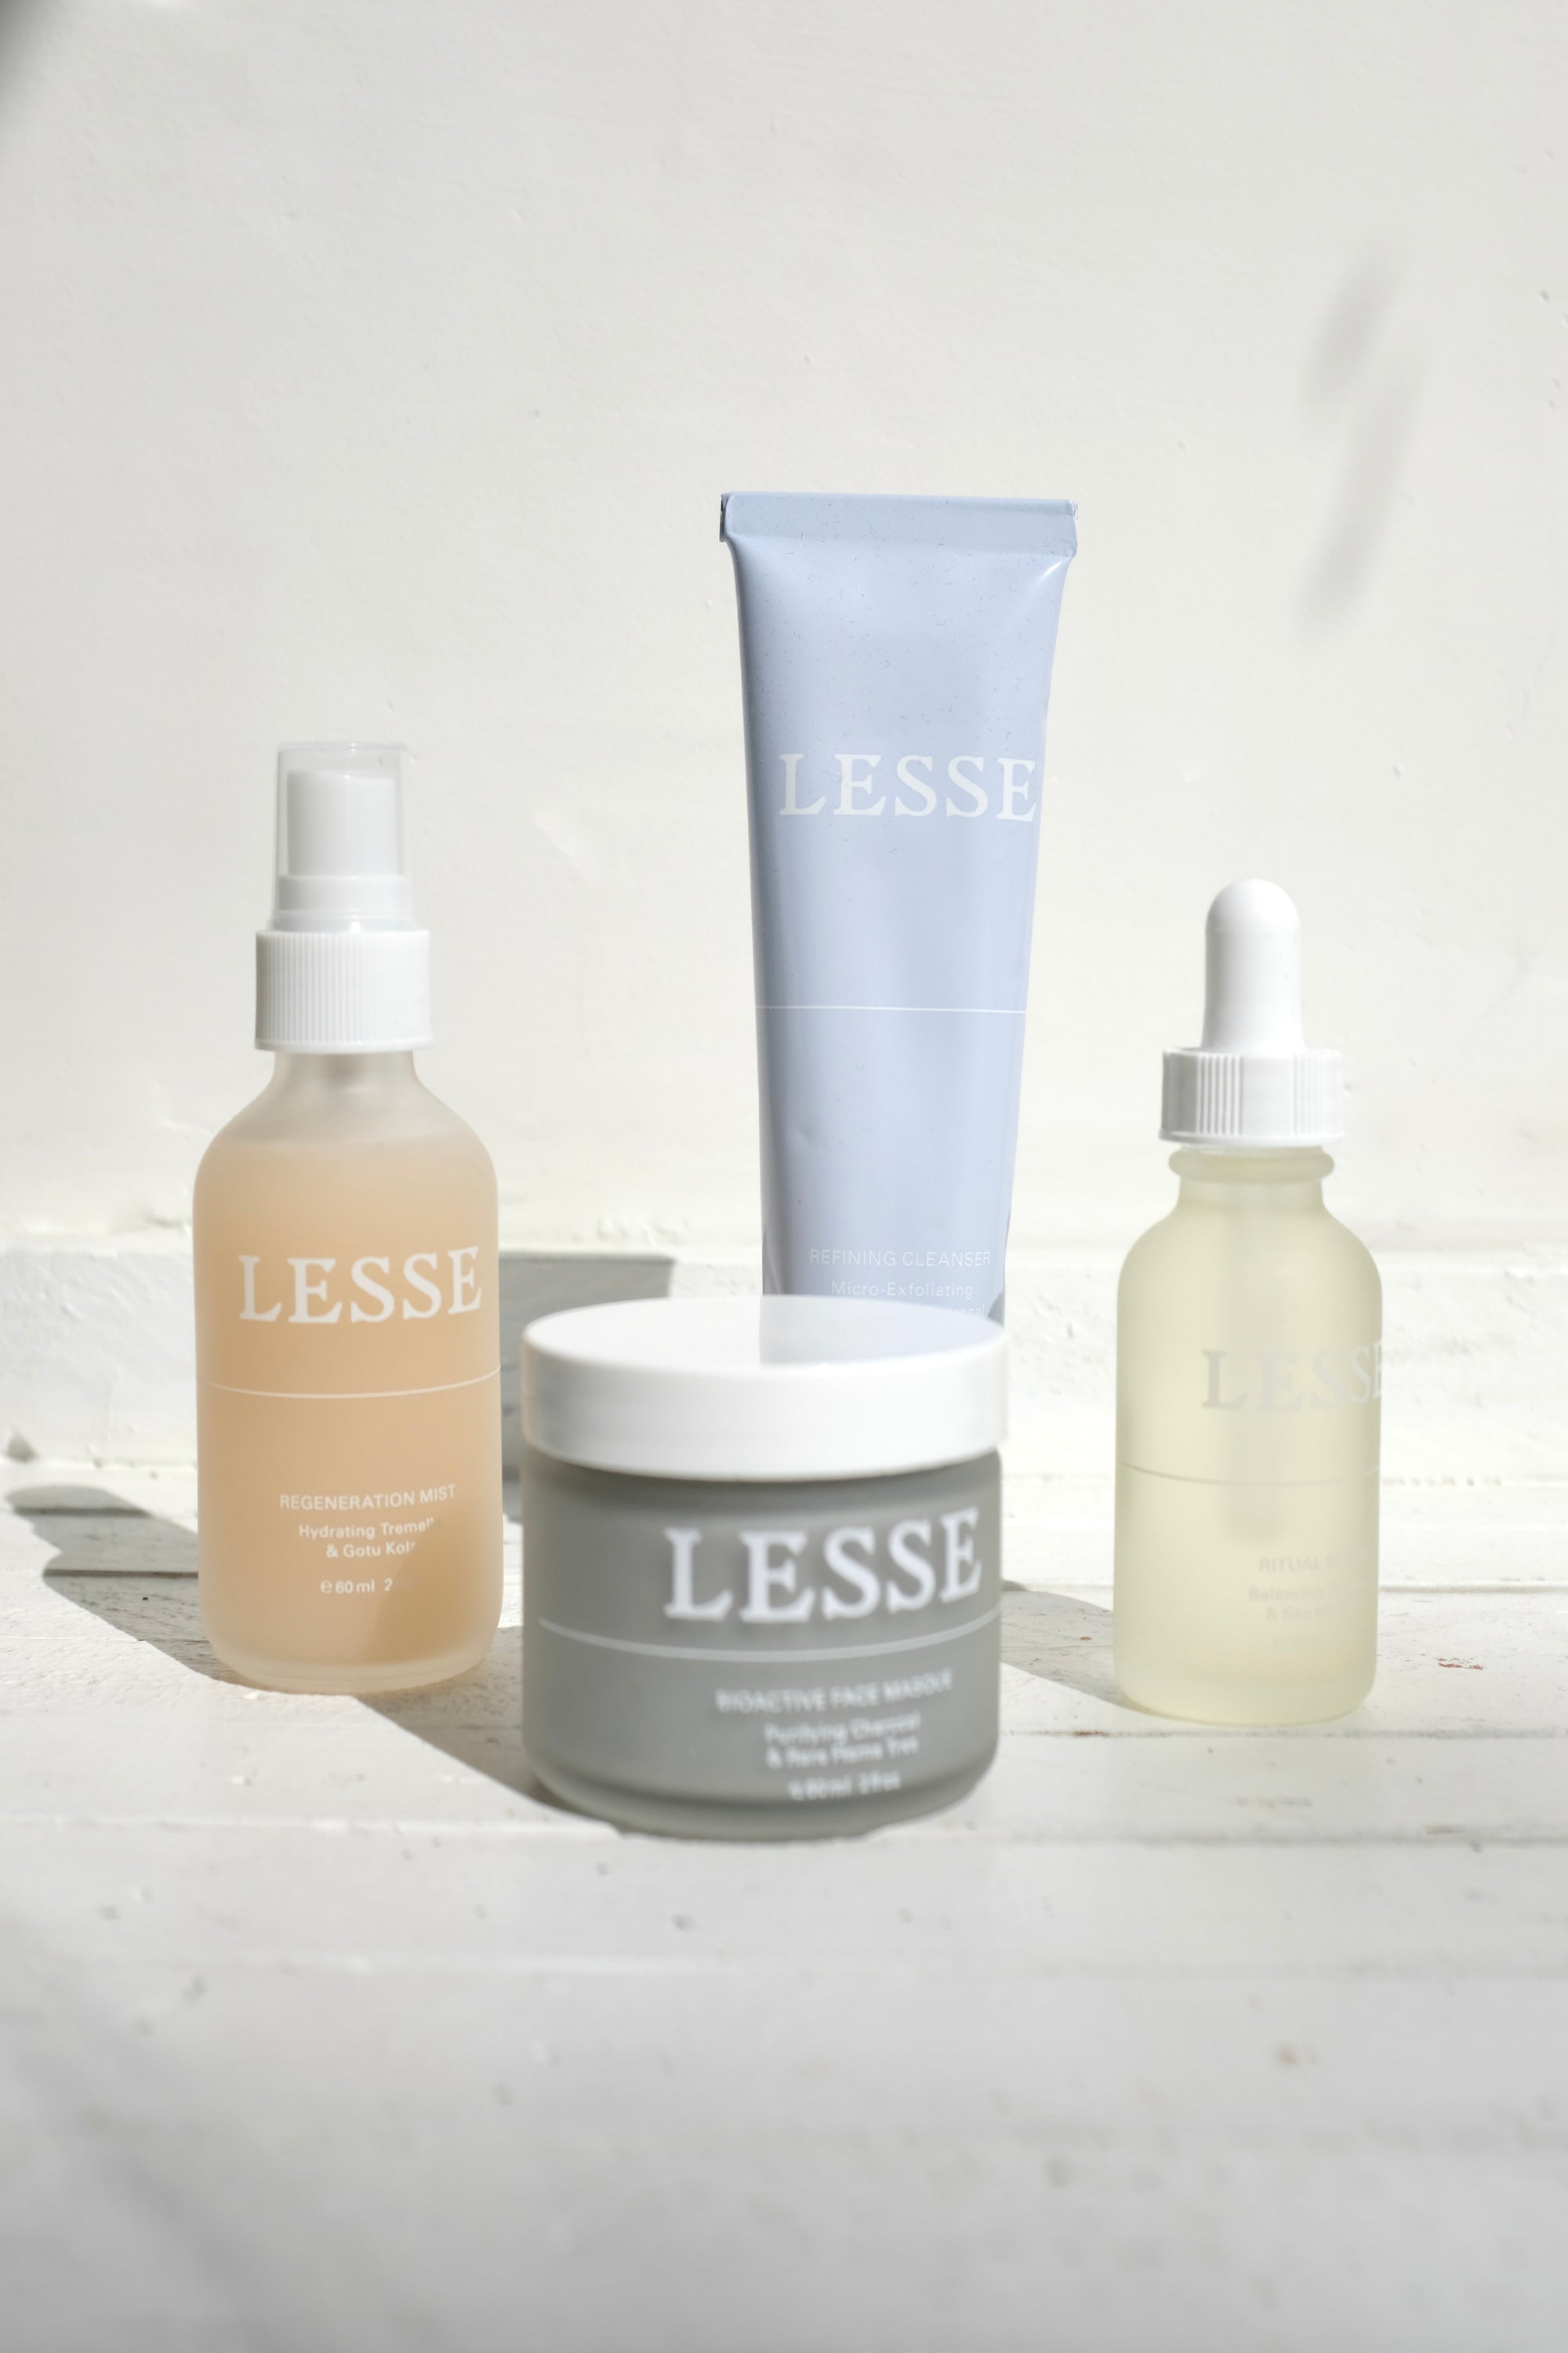 Lesse / Refining Cleanser / Micro-Exfoliating Botanicals & Charcoal